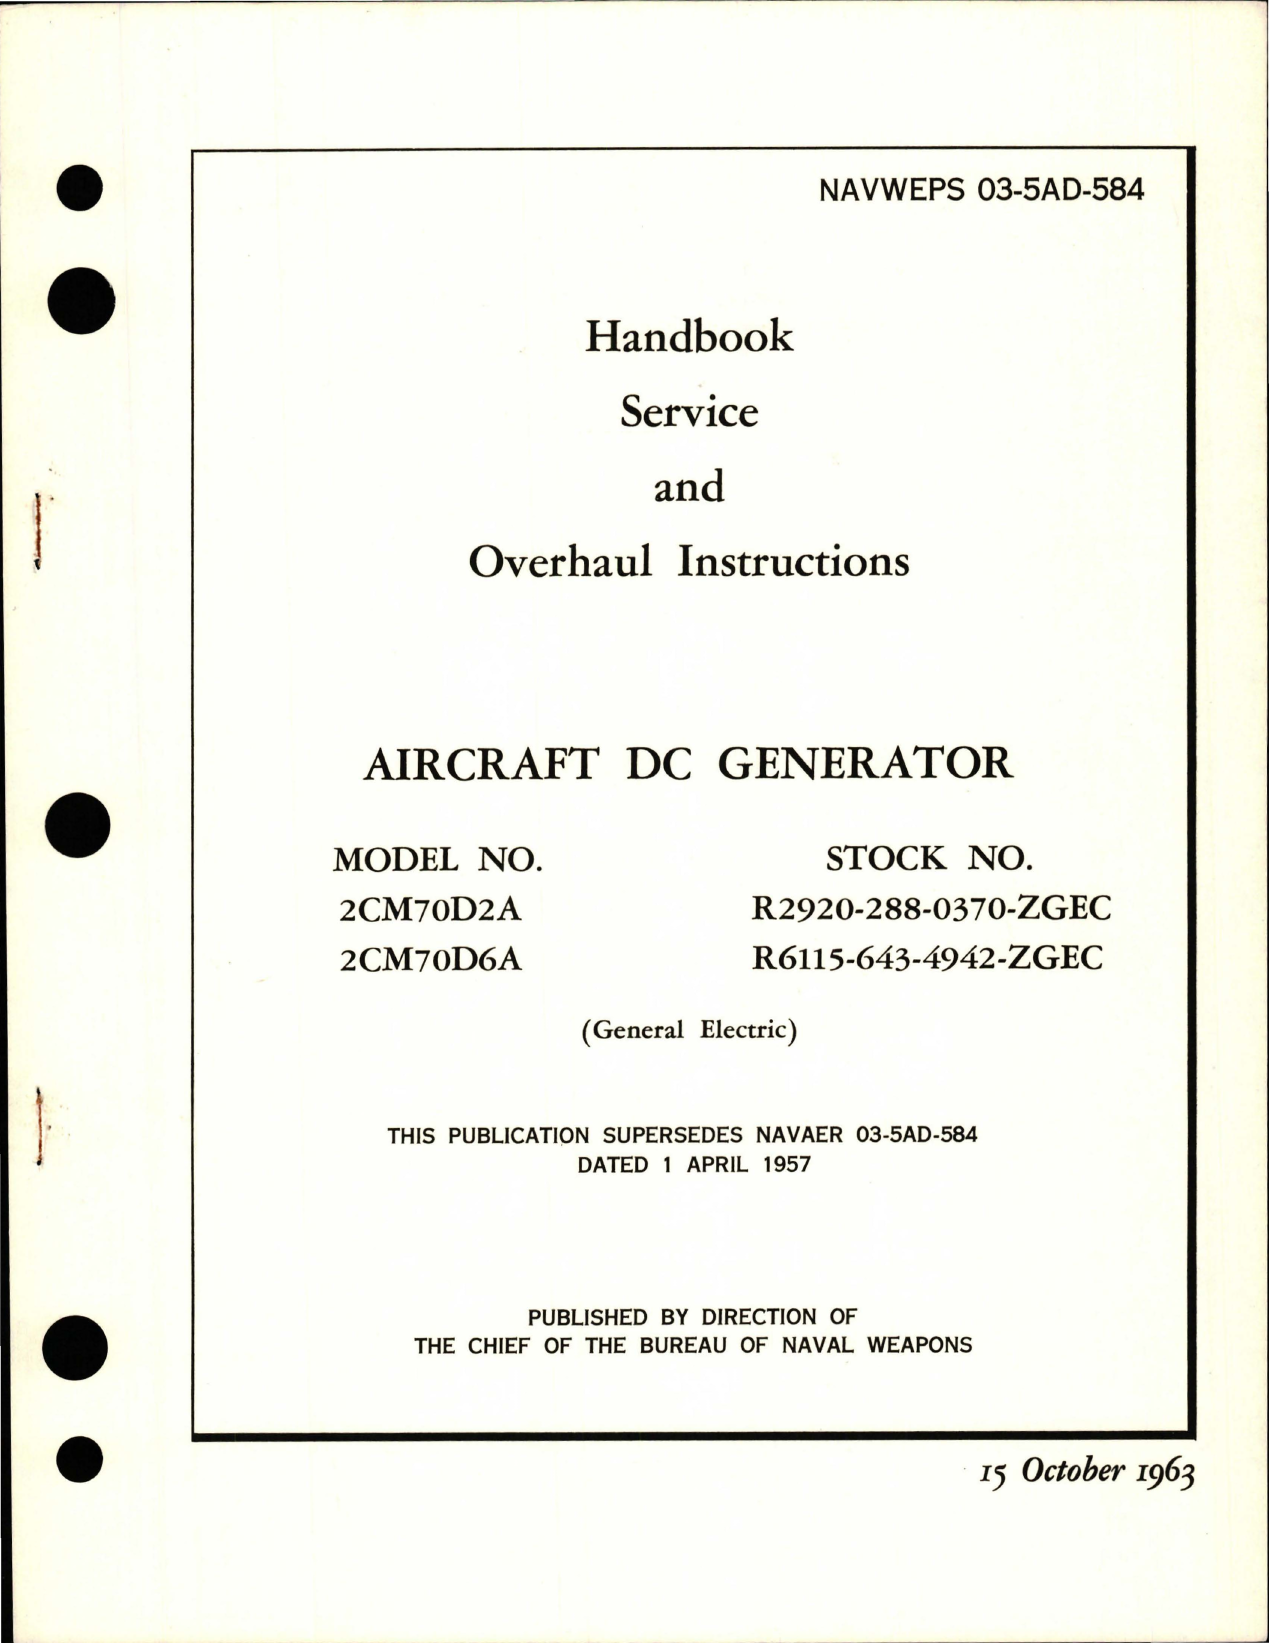 Sample page 1 from AirCorps Library document: Service and Overhaul Instructions for Aircraft DC Generator - Model 2CM70D2A and 2CM70D6A